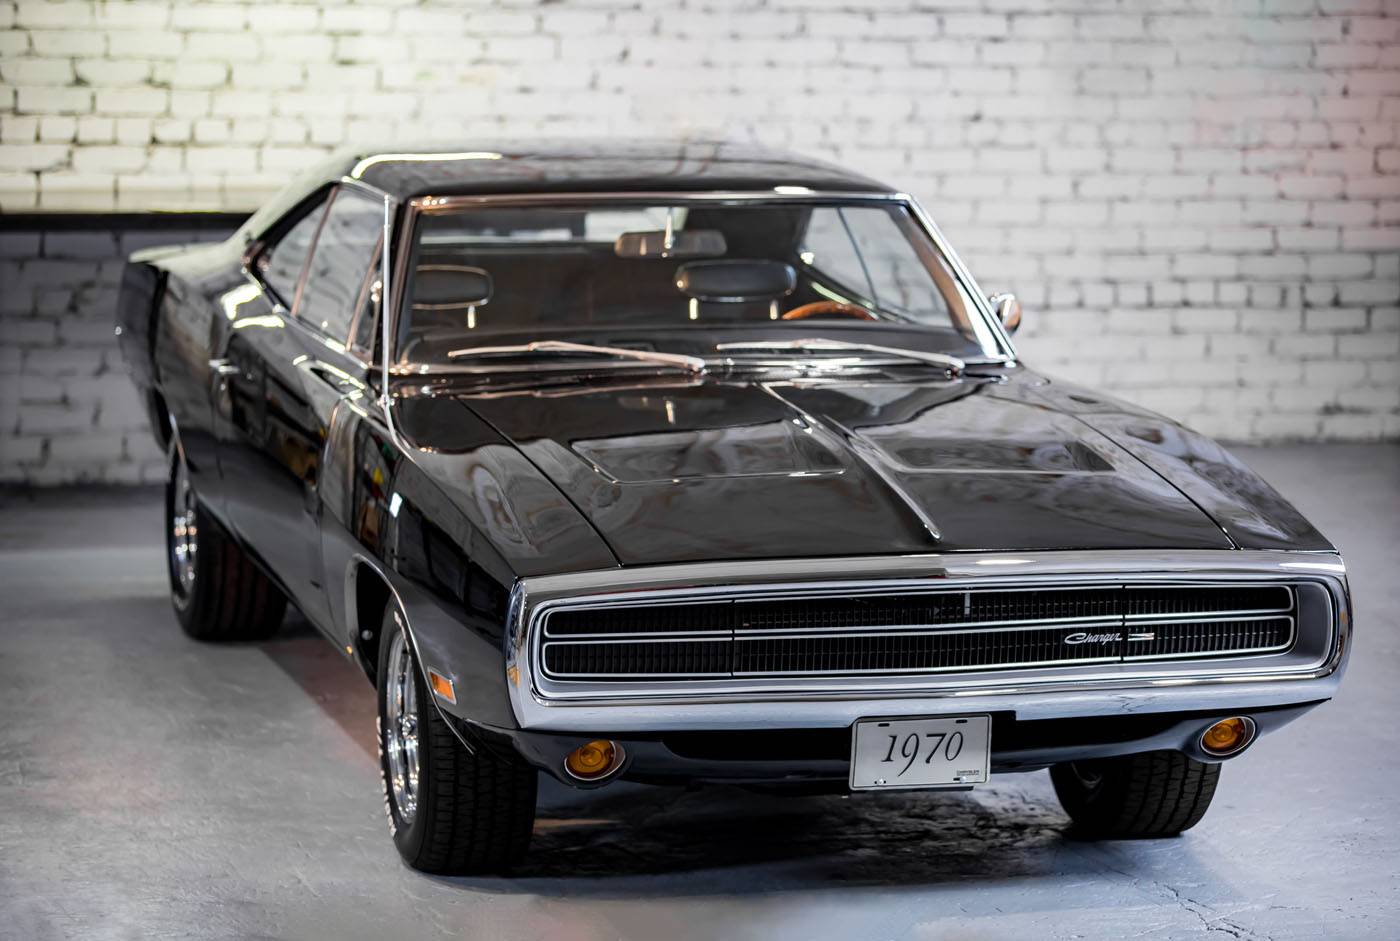 Dodge Charger Classic Cars for Sale - Classic Trader